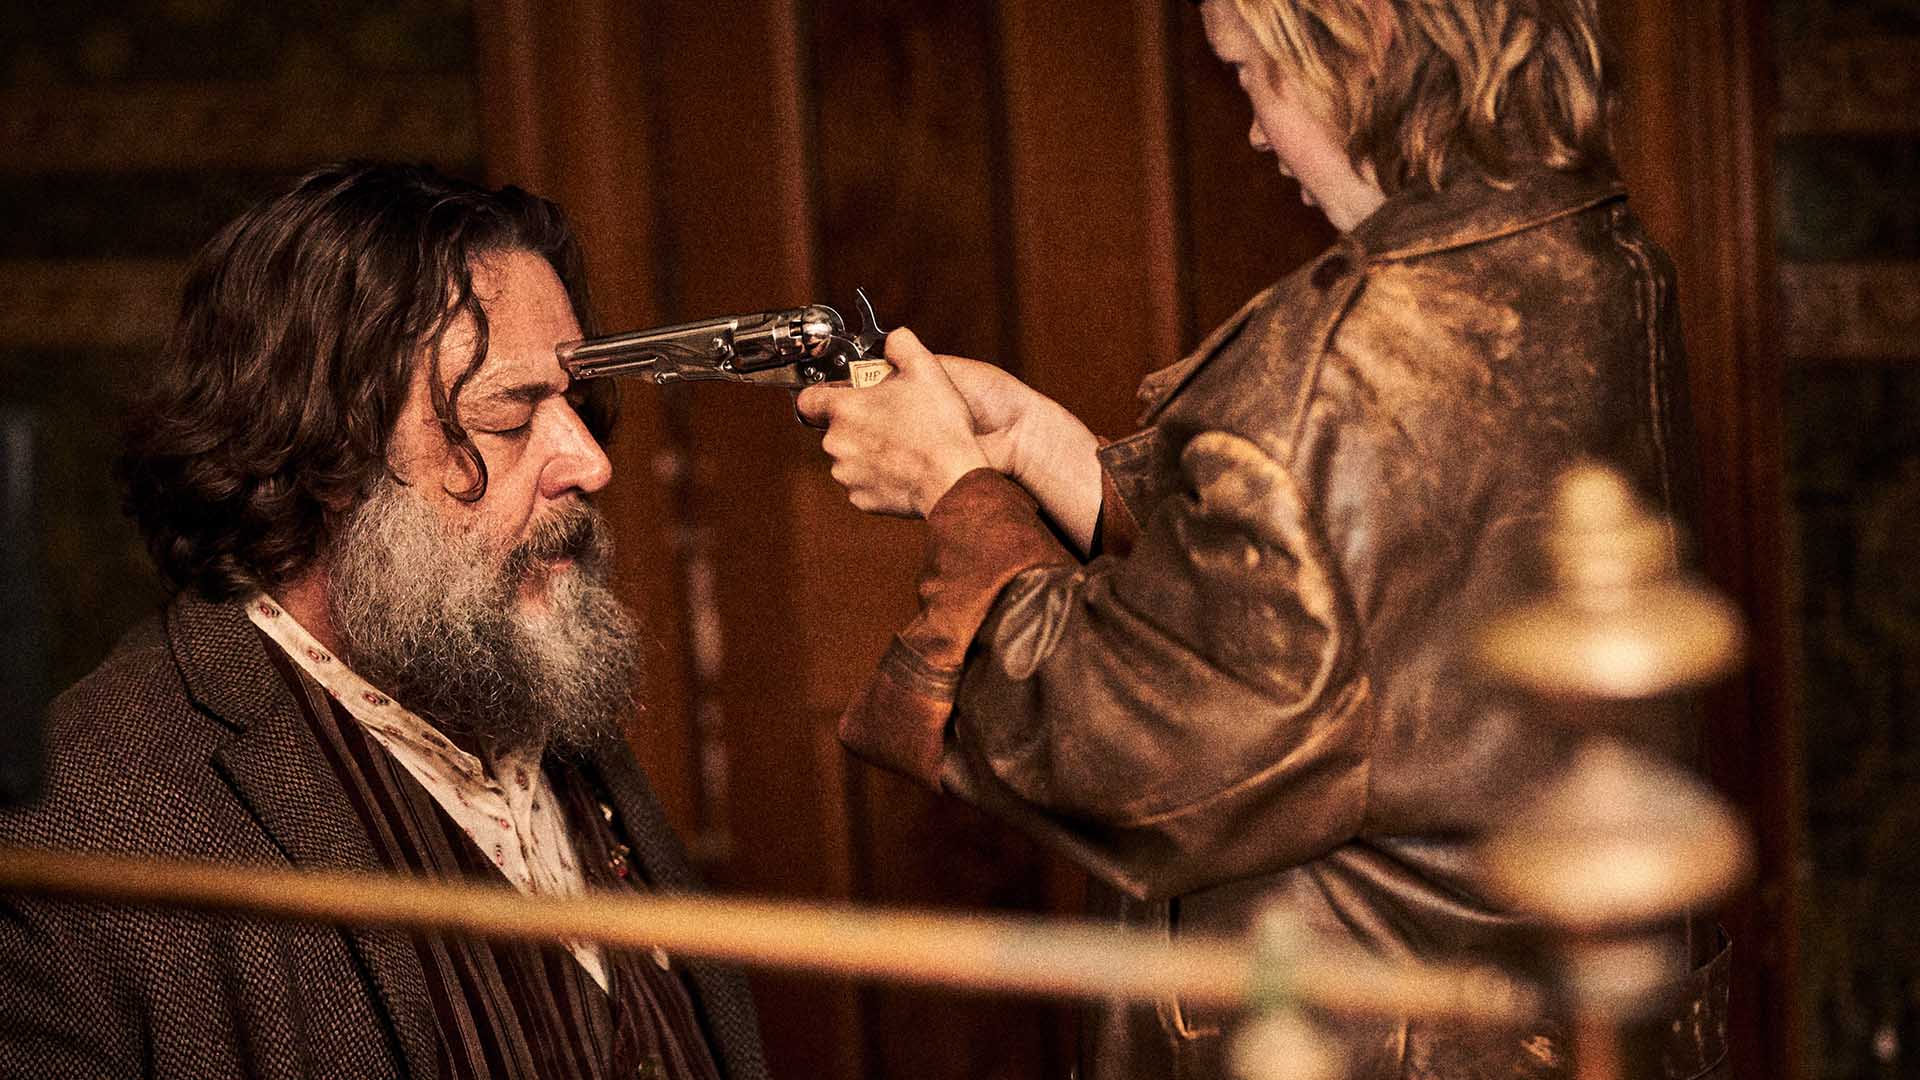 The First Trailer for 'True History of the Kelly Gang' Sets Fire to the Bushranger Tale